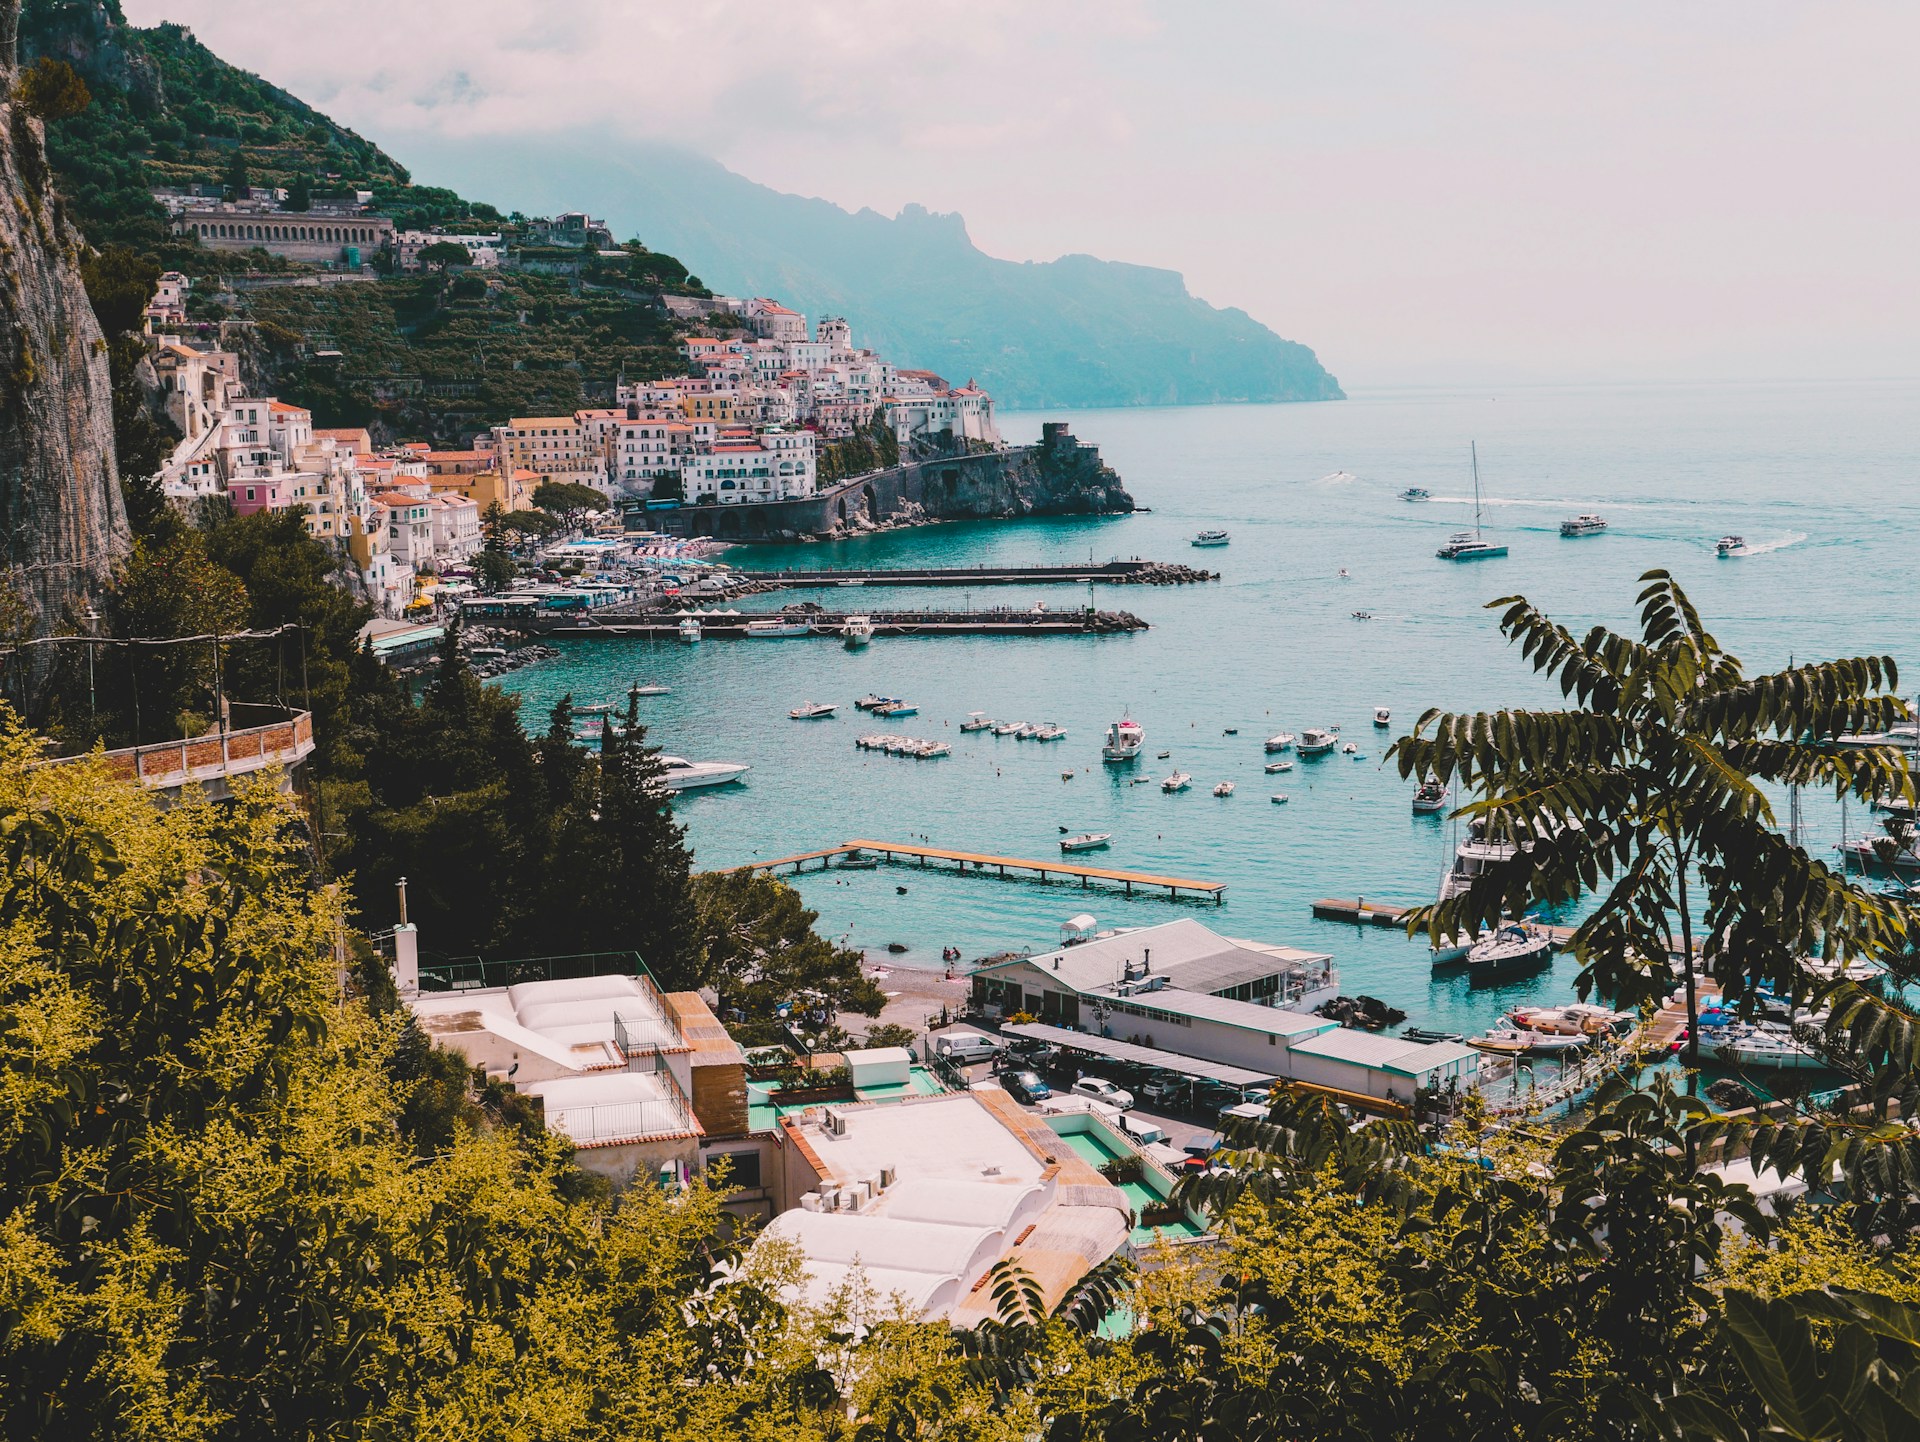 Is it better to stay at Amalfi or Positano?